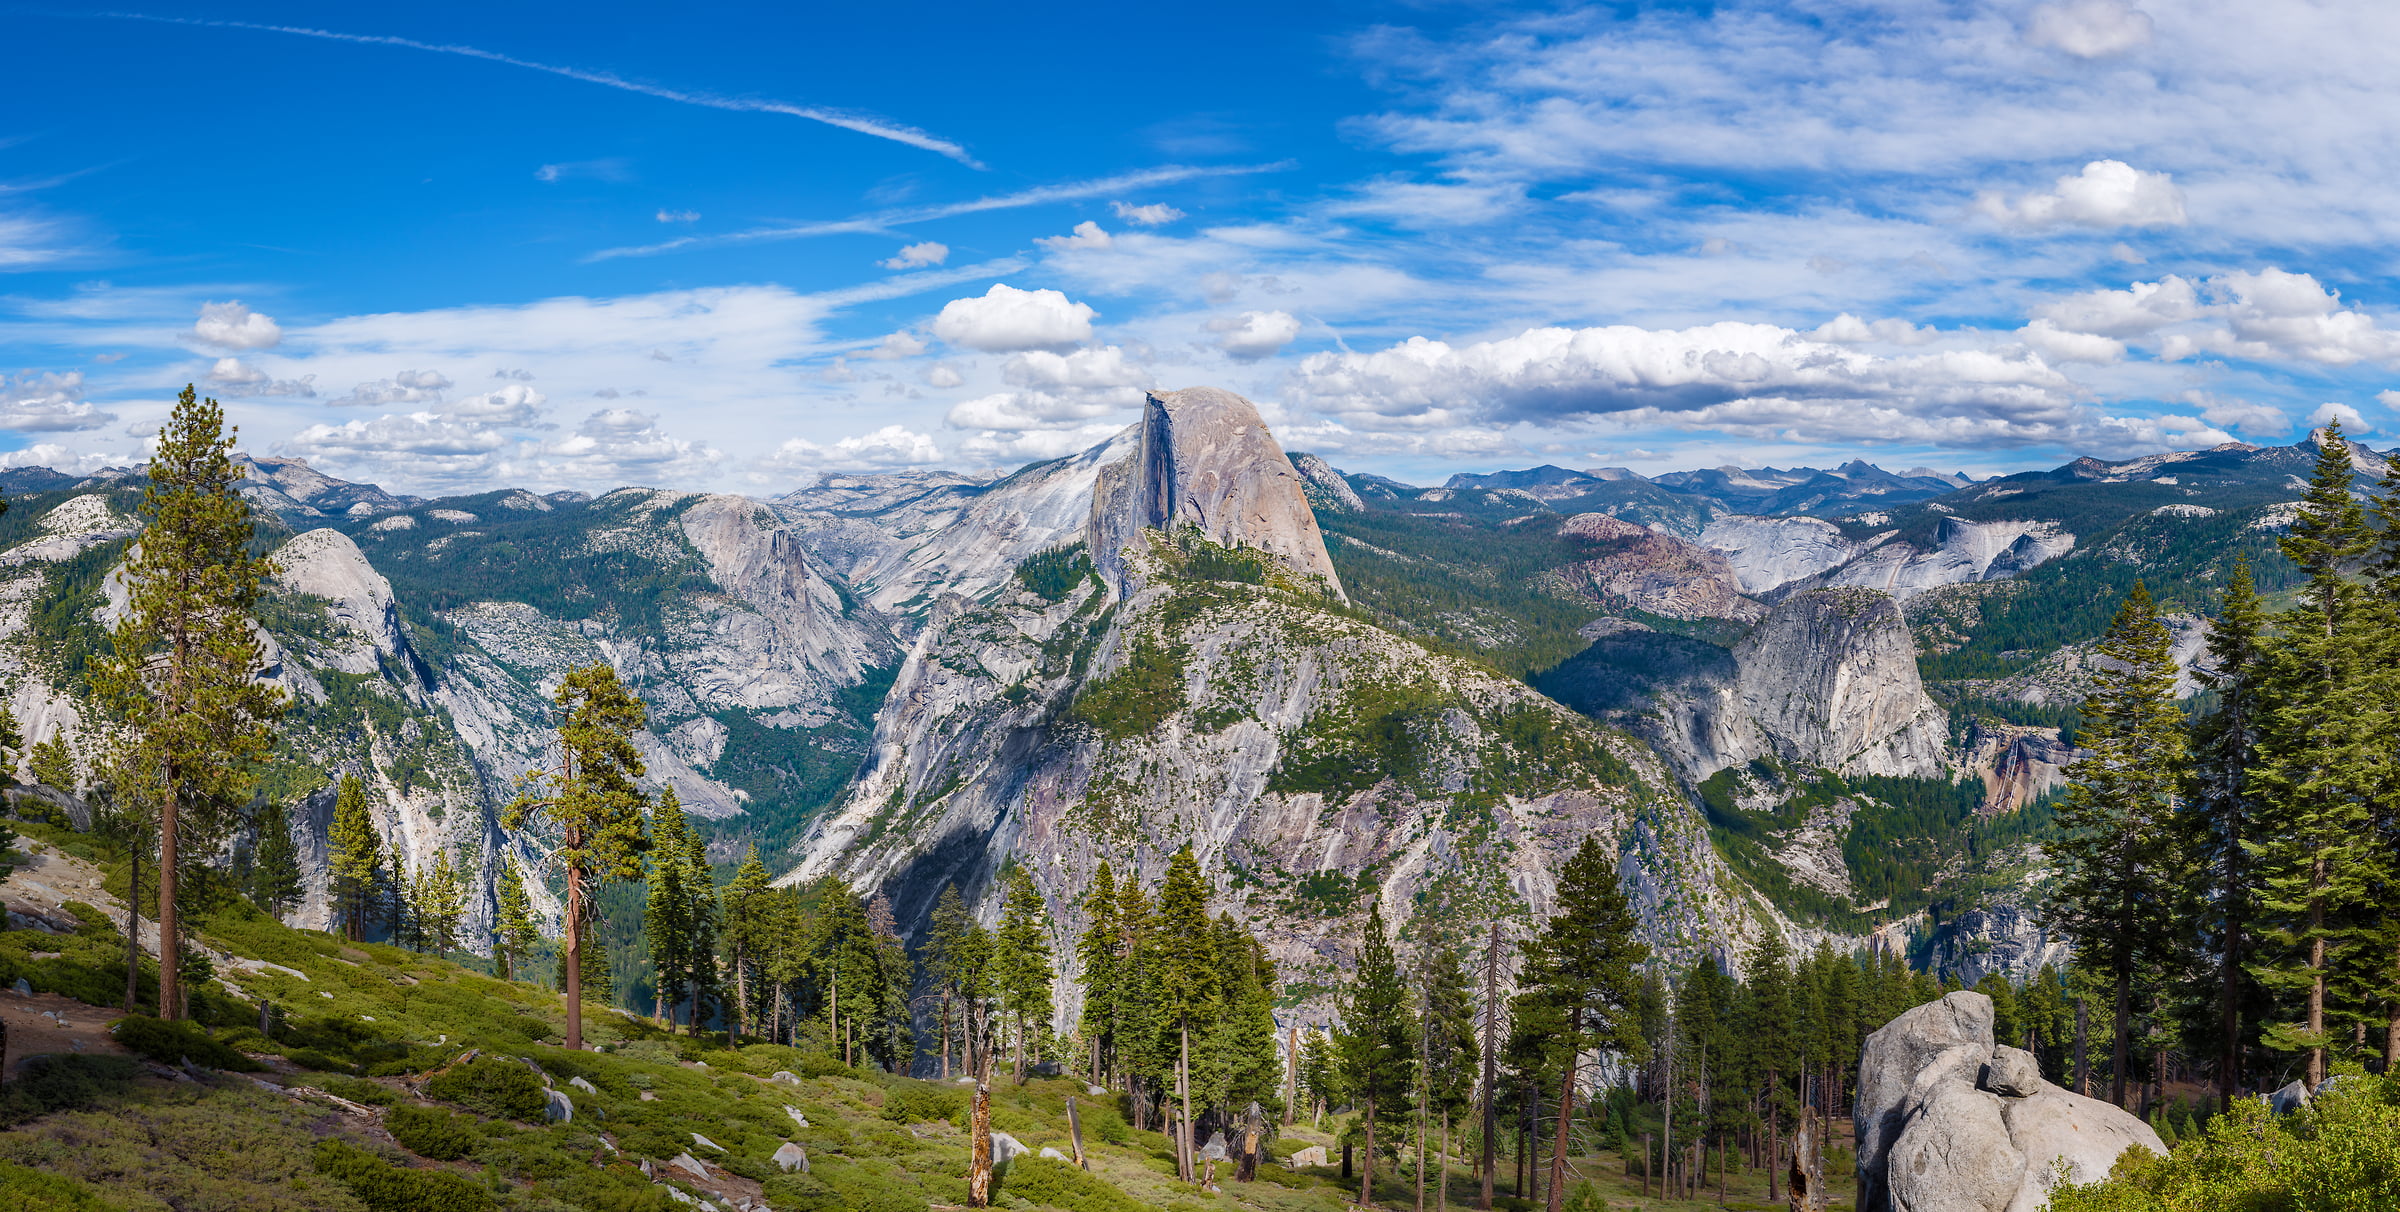 288 megapixels! A very high resolution, large-format VAST photo of an American landscape with an idyllic valley; fine art landscape photograph created by Jim Tarpo in Half Dome, Yosemite National Park, California.